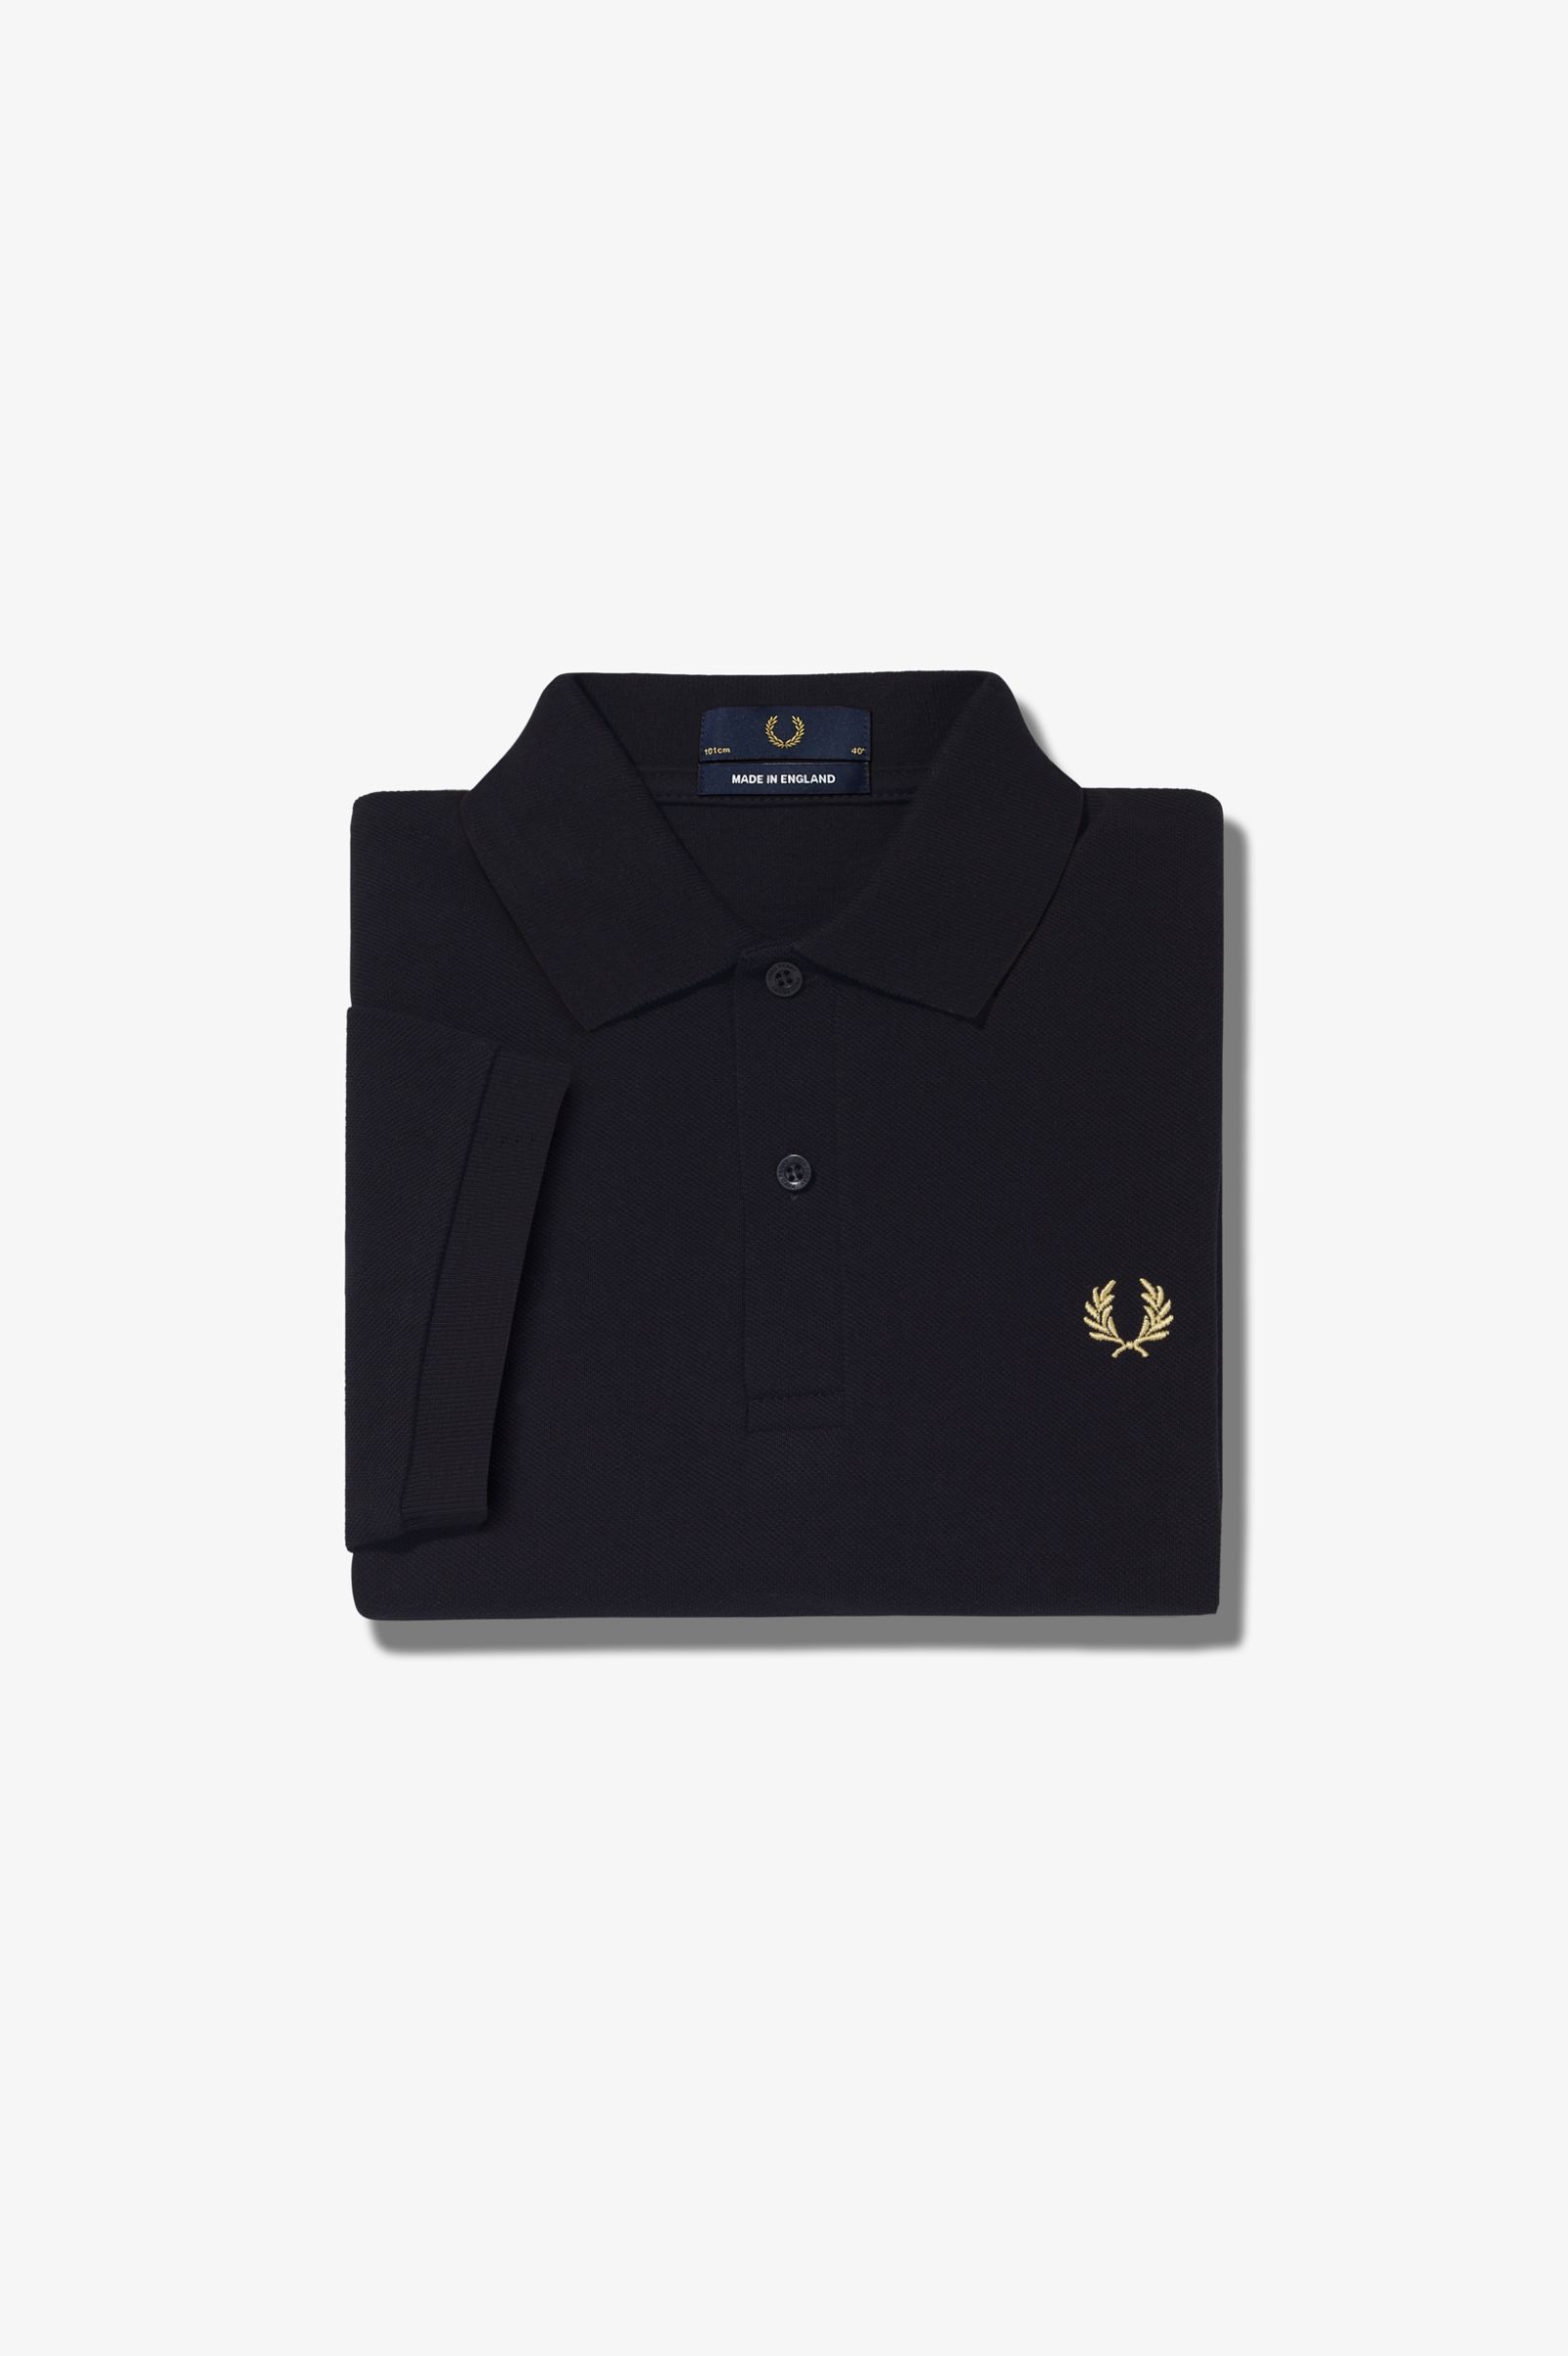 M3 - Black / Champagne | The Fred Perry Shirt | Men's Short & Long